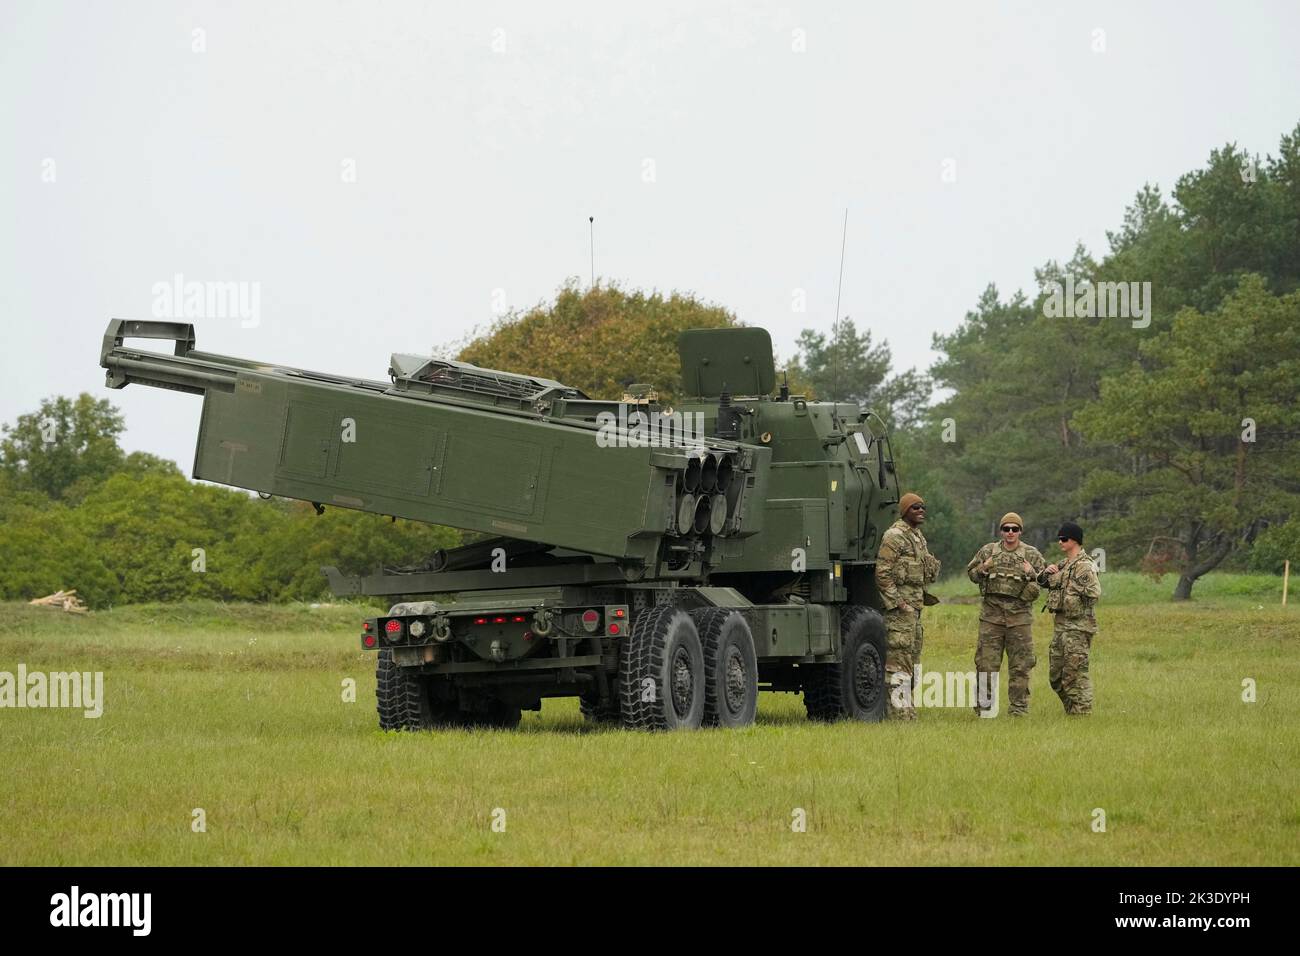 A M142 High Mobility Artillery Rocket System (HIMARS) takes part in a military exercise near Liepaja, Latvia September 26, 2022. REUTERS/Ints Kalnins Stock Photo